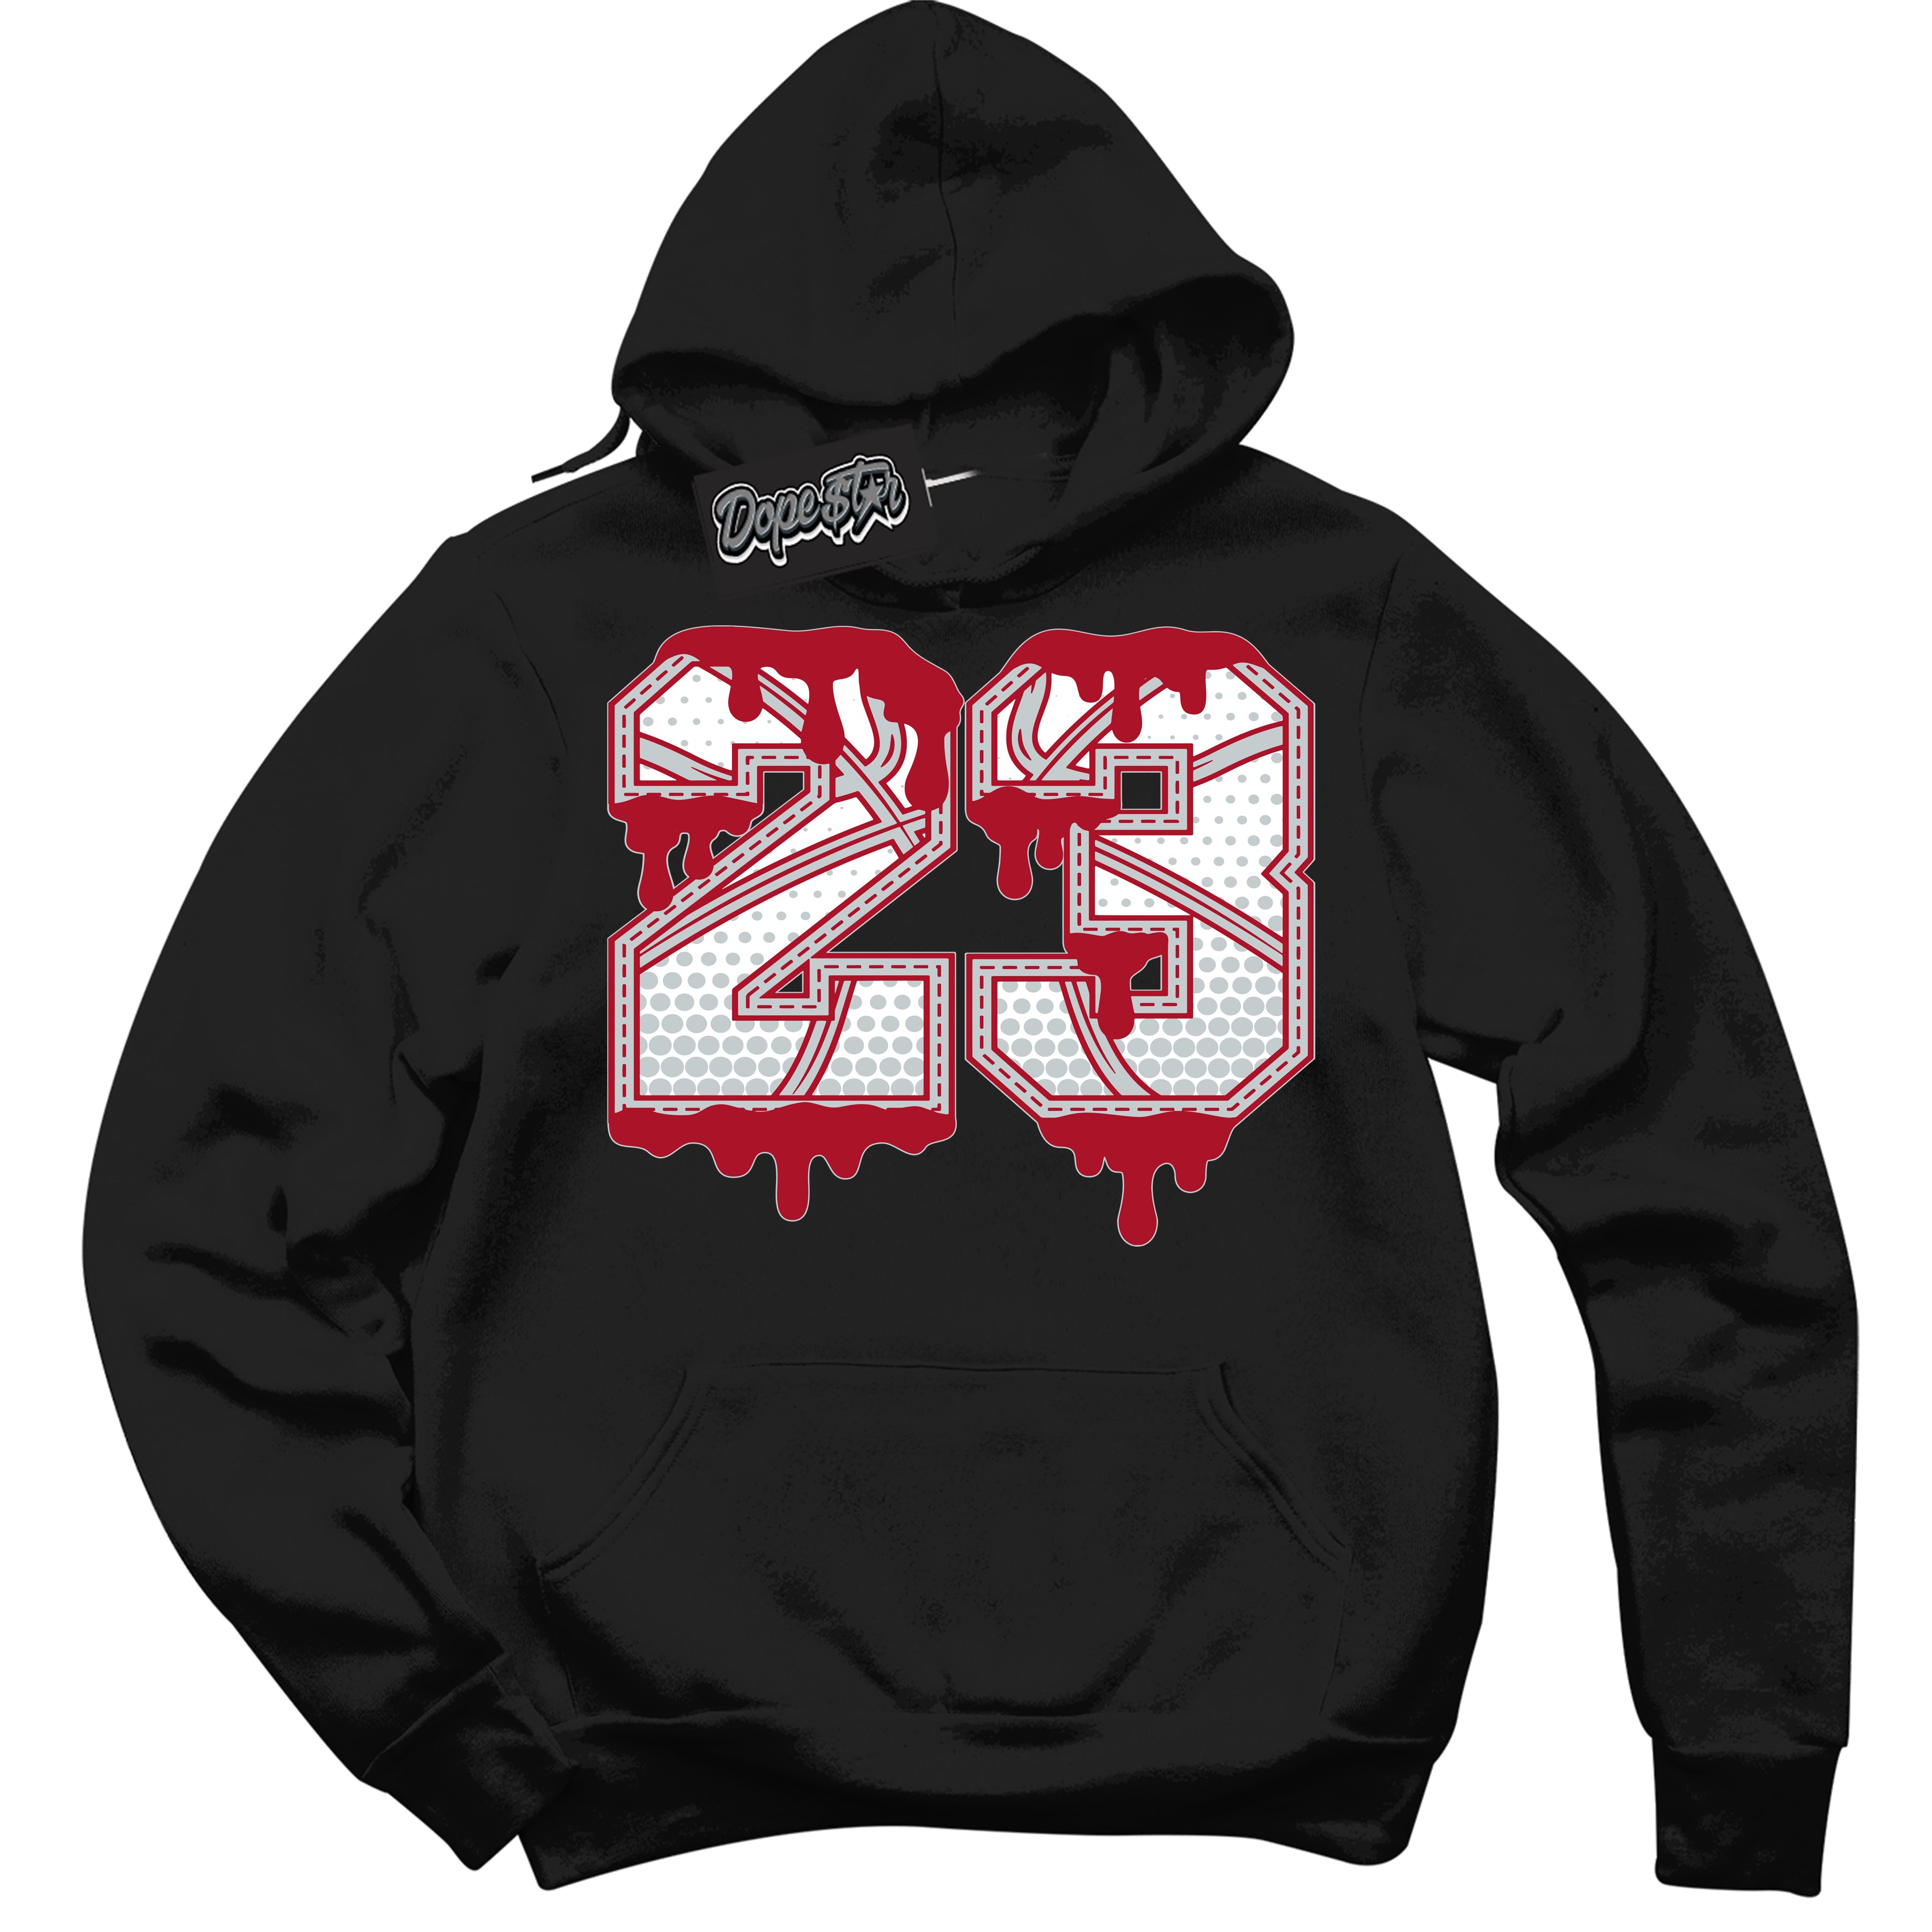 Cool Black Hoodie with “ 23 Ball ”  design that Perfectly Matches  Reverse Ultraman Sneakers.